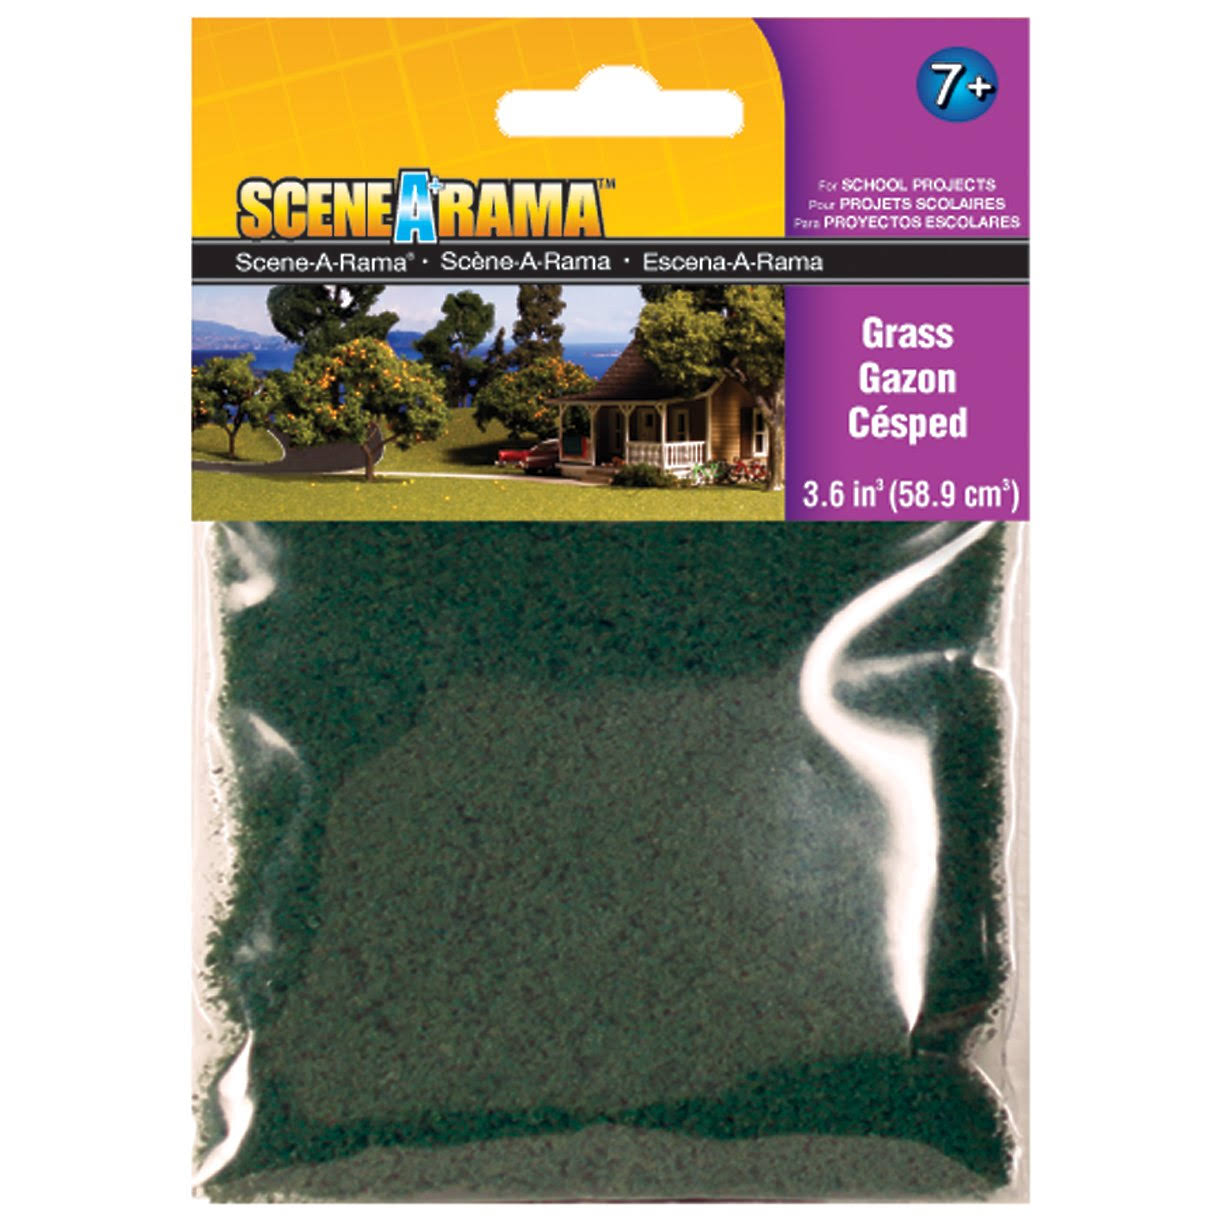 Woodland Scenics Sp4180 Scenery Bags Grass for sale online 